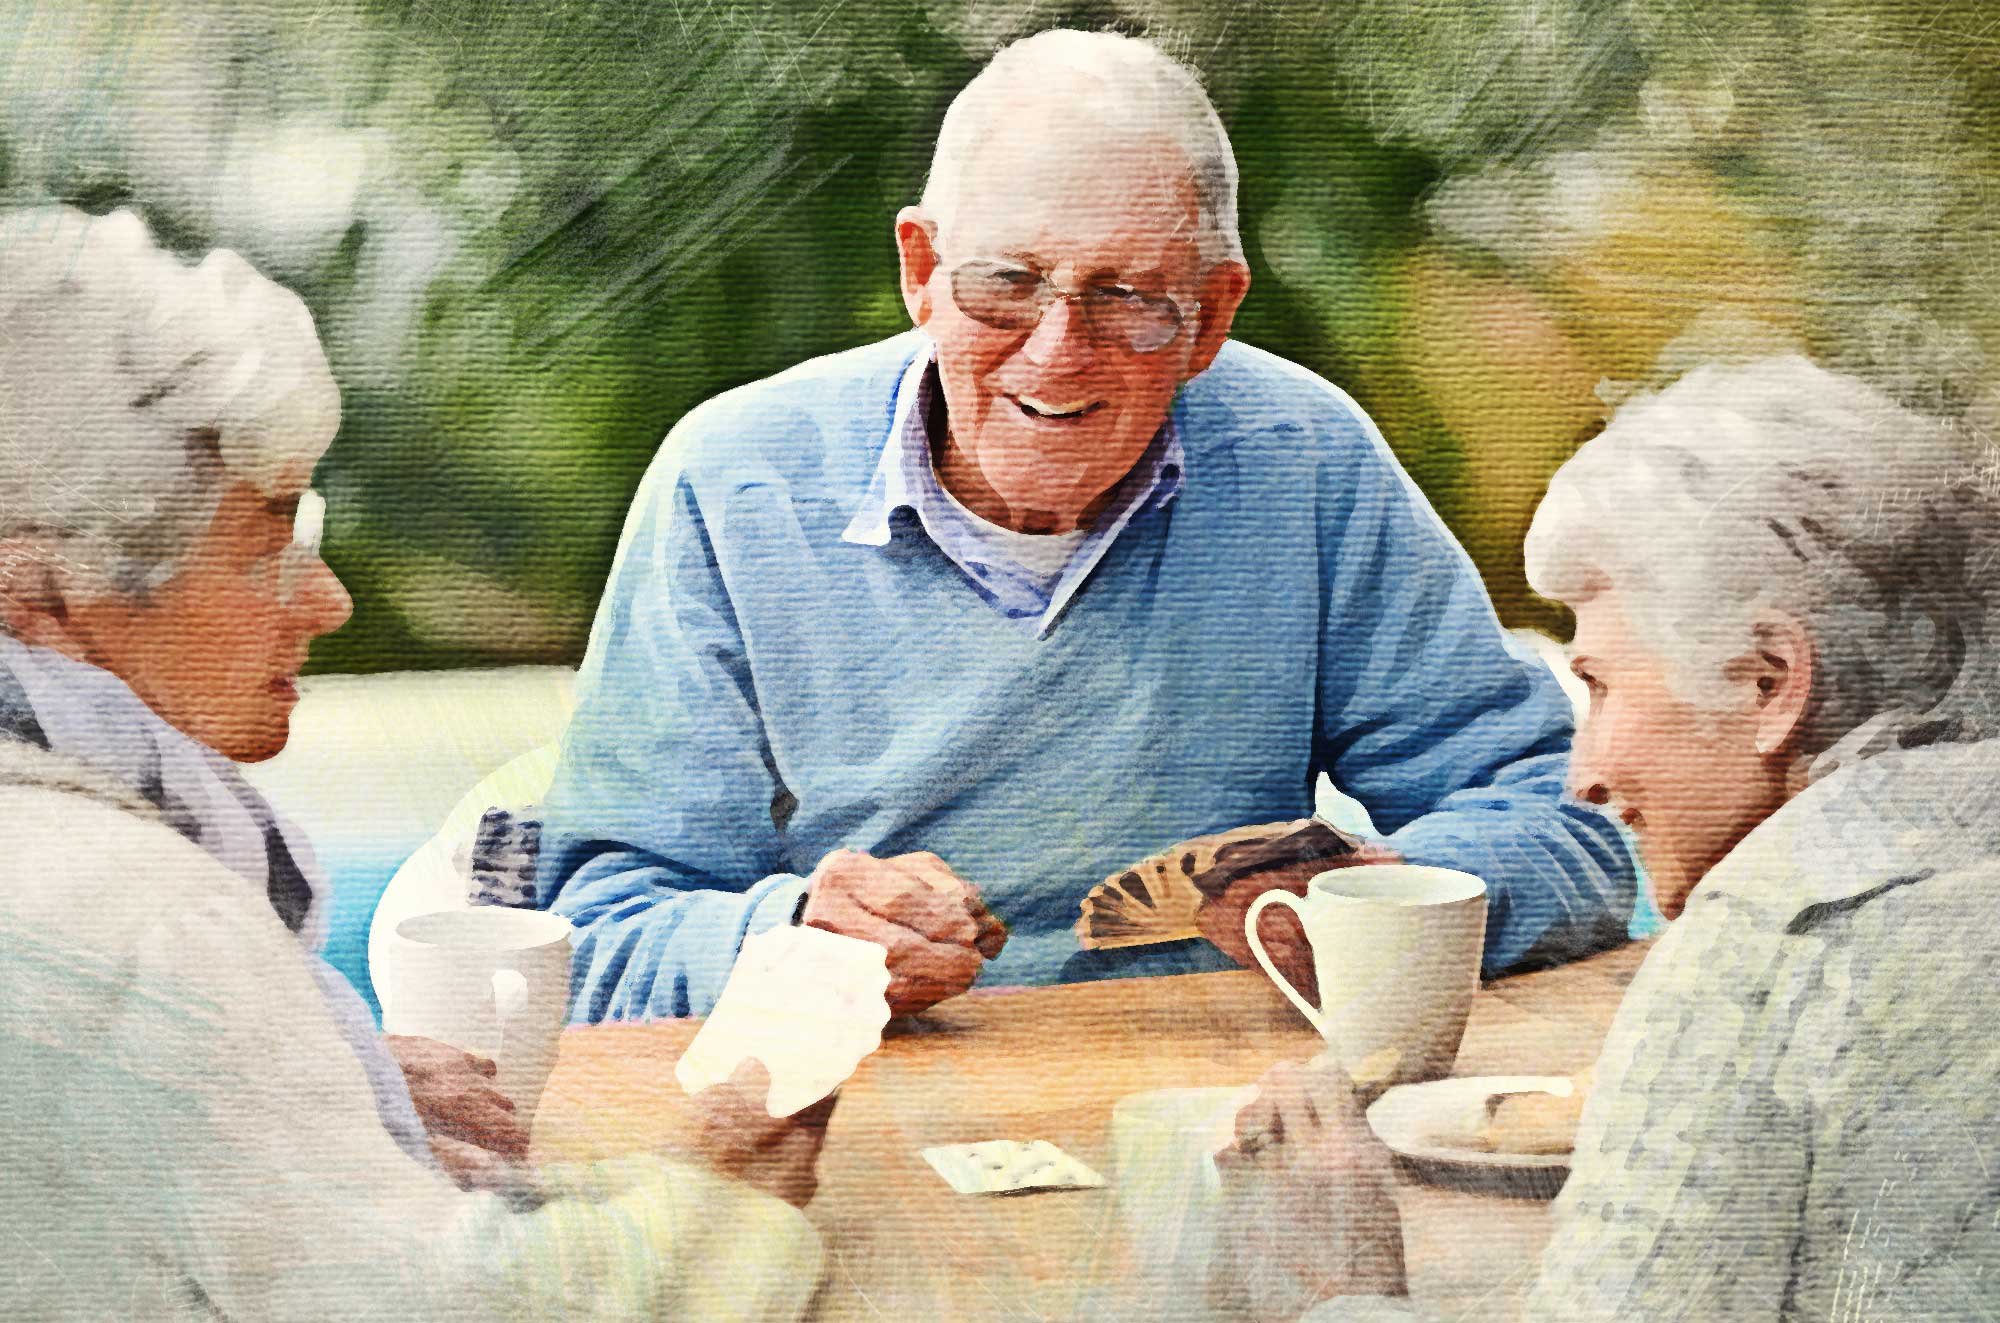 Elderly man and two elderly women playing cards.